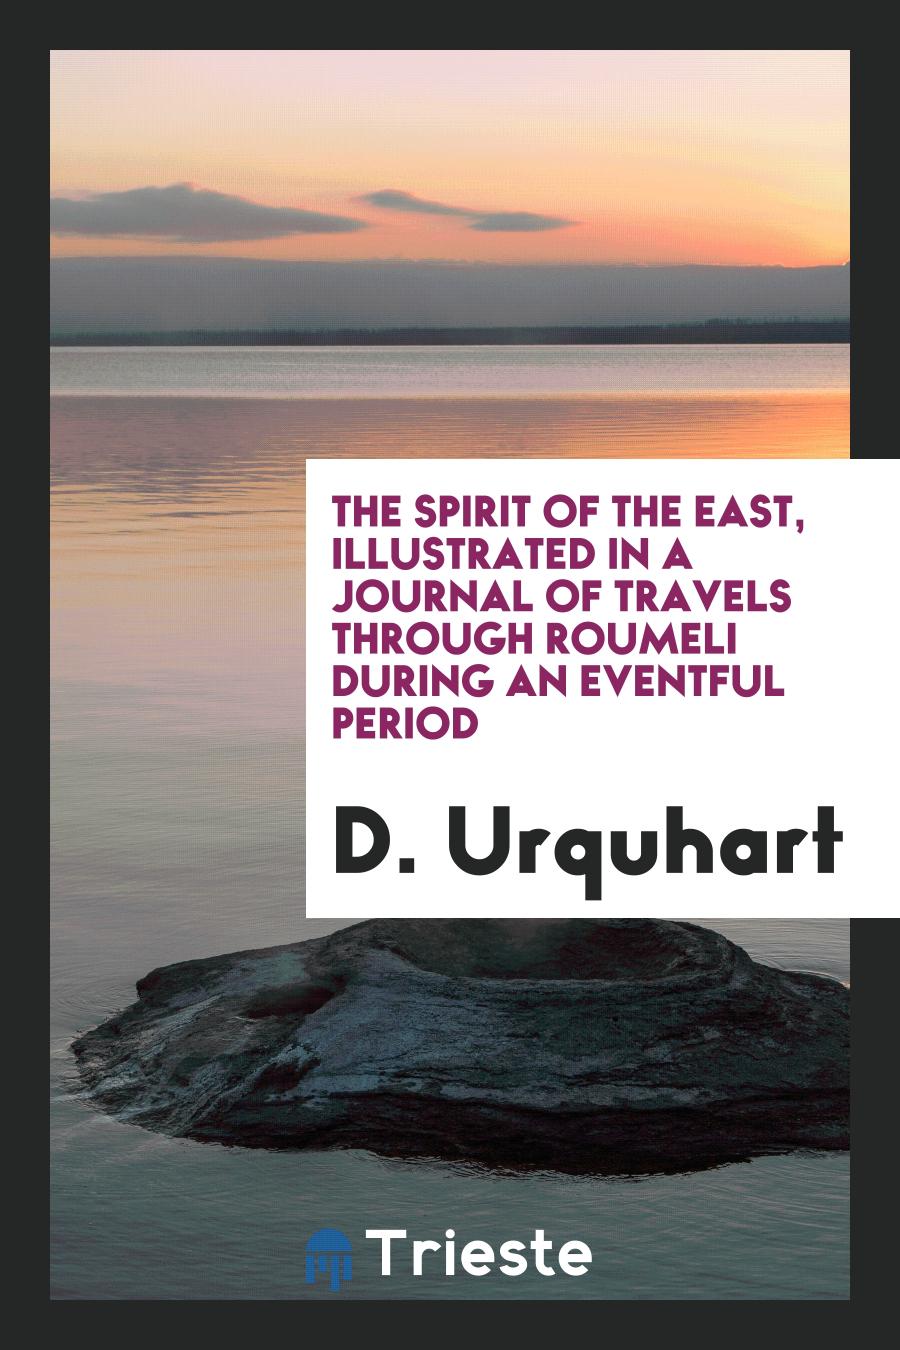 The Spirit of the East, Illustrated in a Journal of Travels Through Roumeli During an Eventful Period